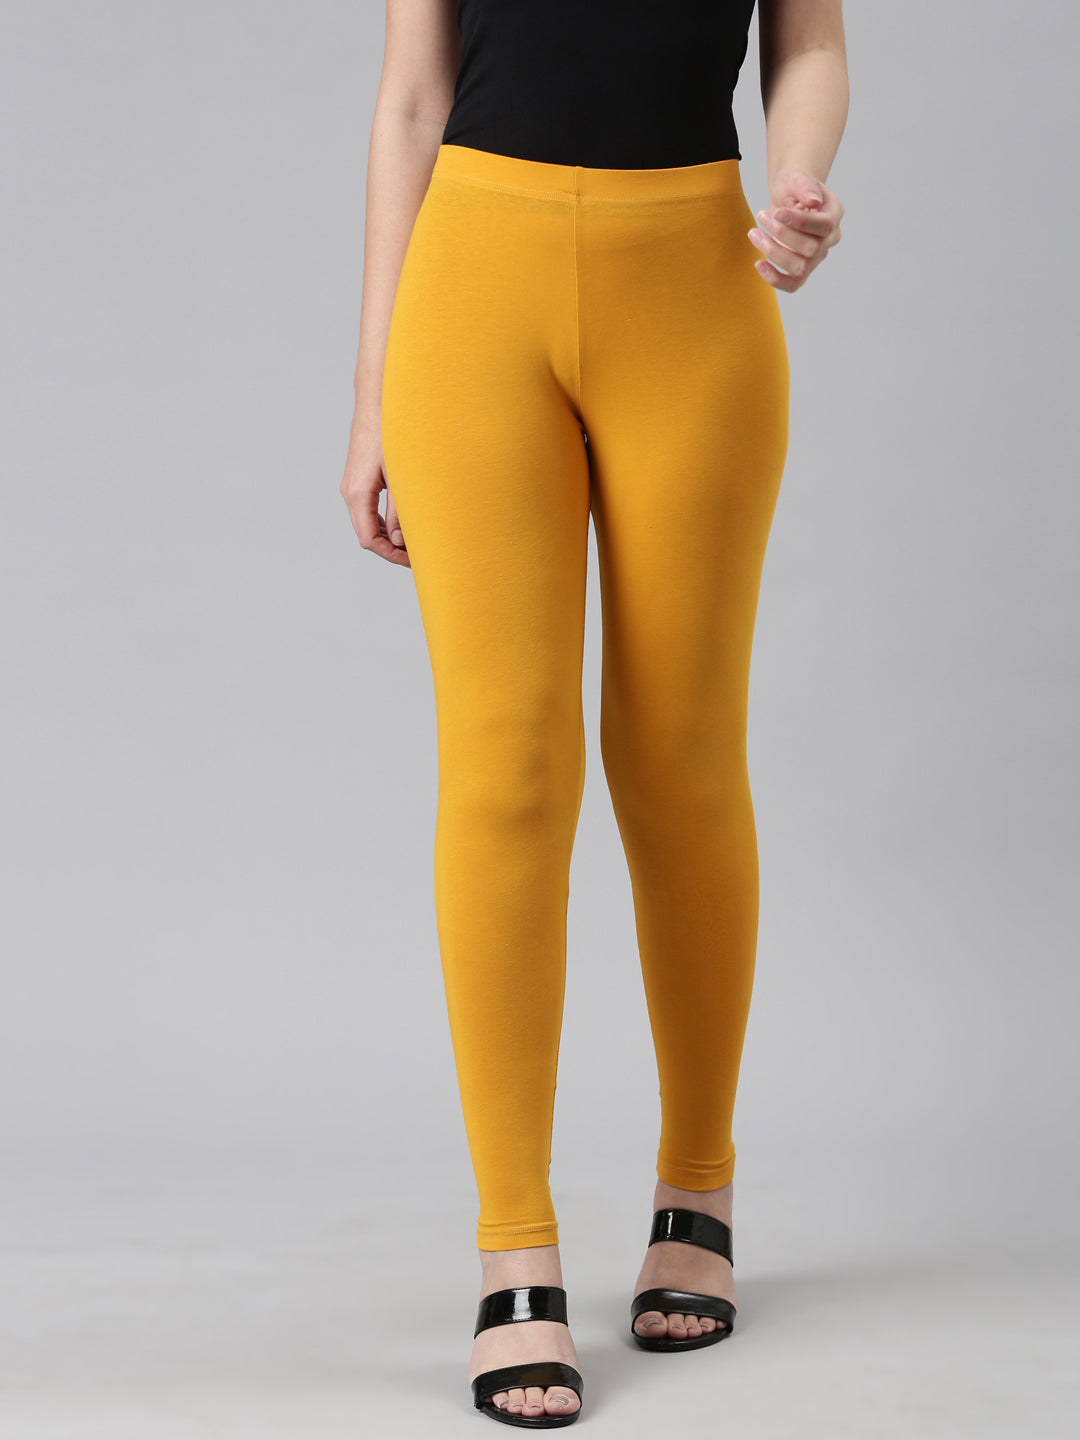 Ankle Length Leggings In Bengaluru (Bangalore) - Prices, Manufacturers &  Suppliers